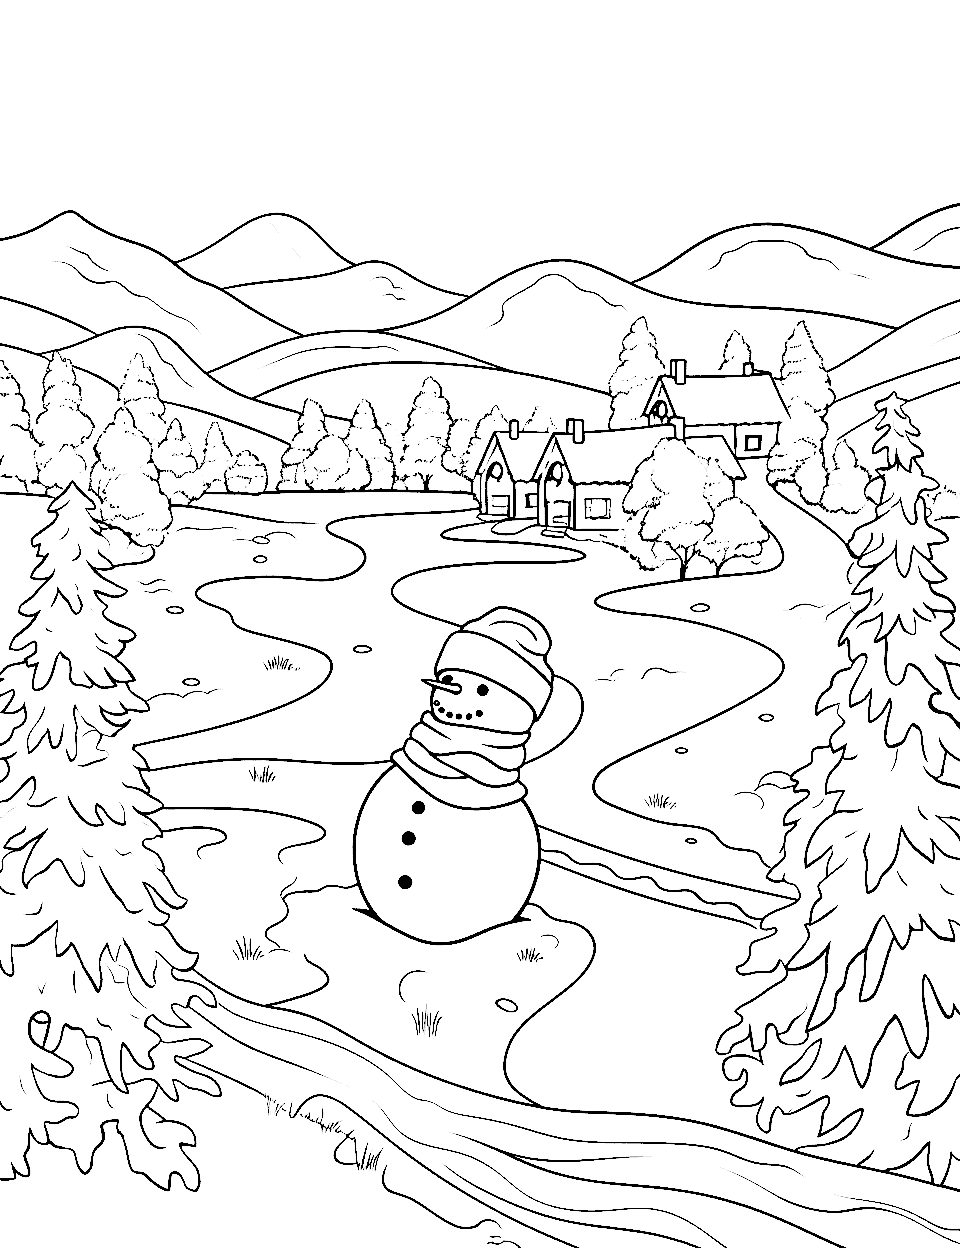 Large Snowy Landscape Winter Coloring Page - A large, detailed image of a snowy landscape filled with trees, houses, and mountains.